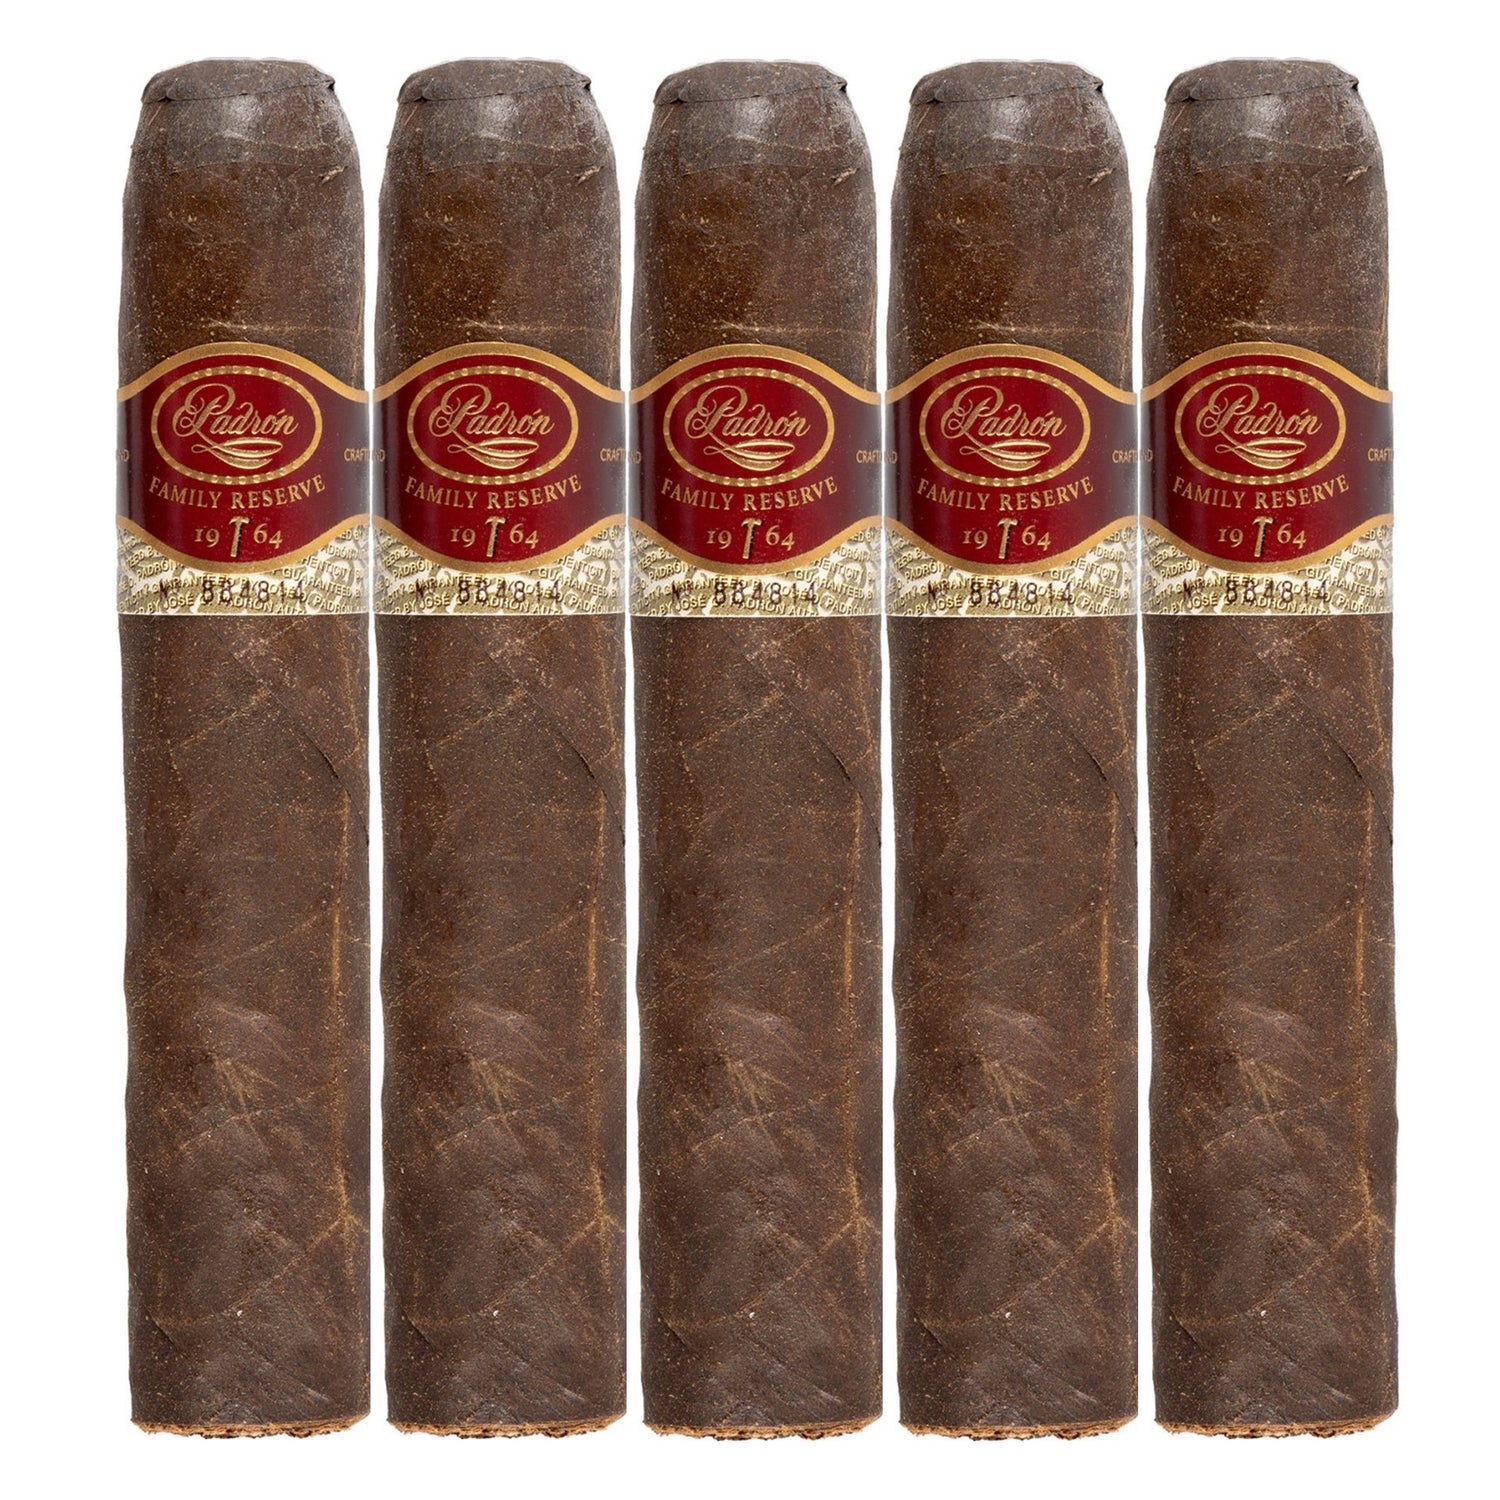 Padron Family Reserve No.95 Cigars 5 Pack